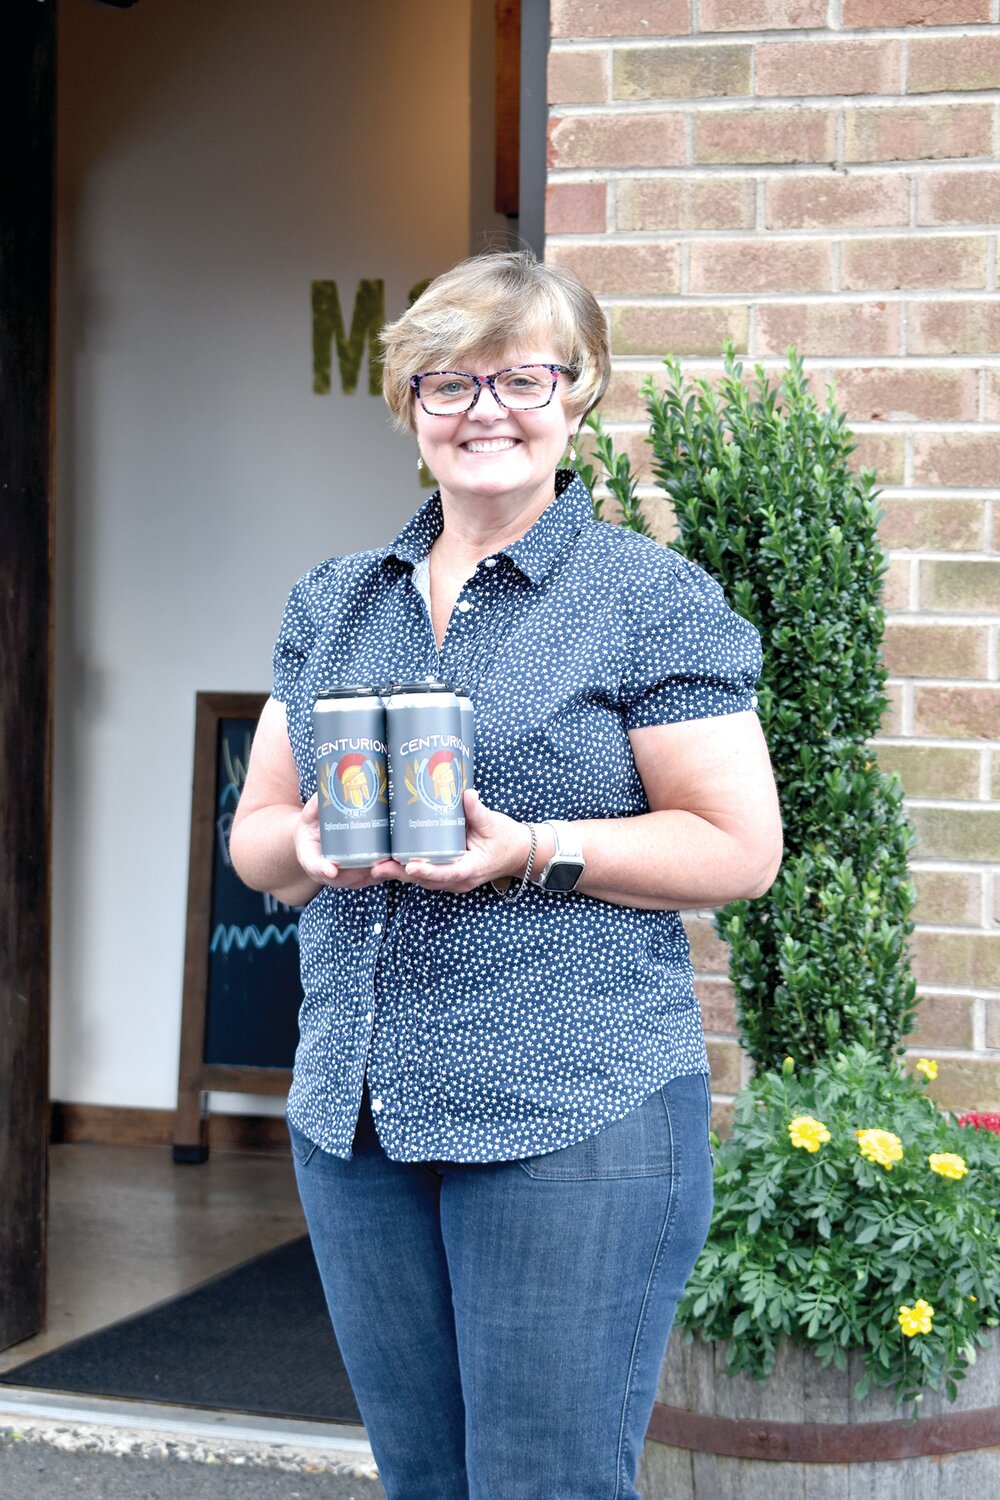 Quakertown resident Susan Alexander was the winner of the countywide contest to design the Centurion Ale can label.